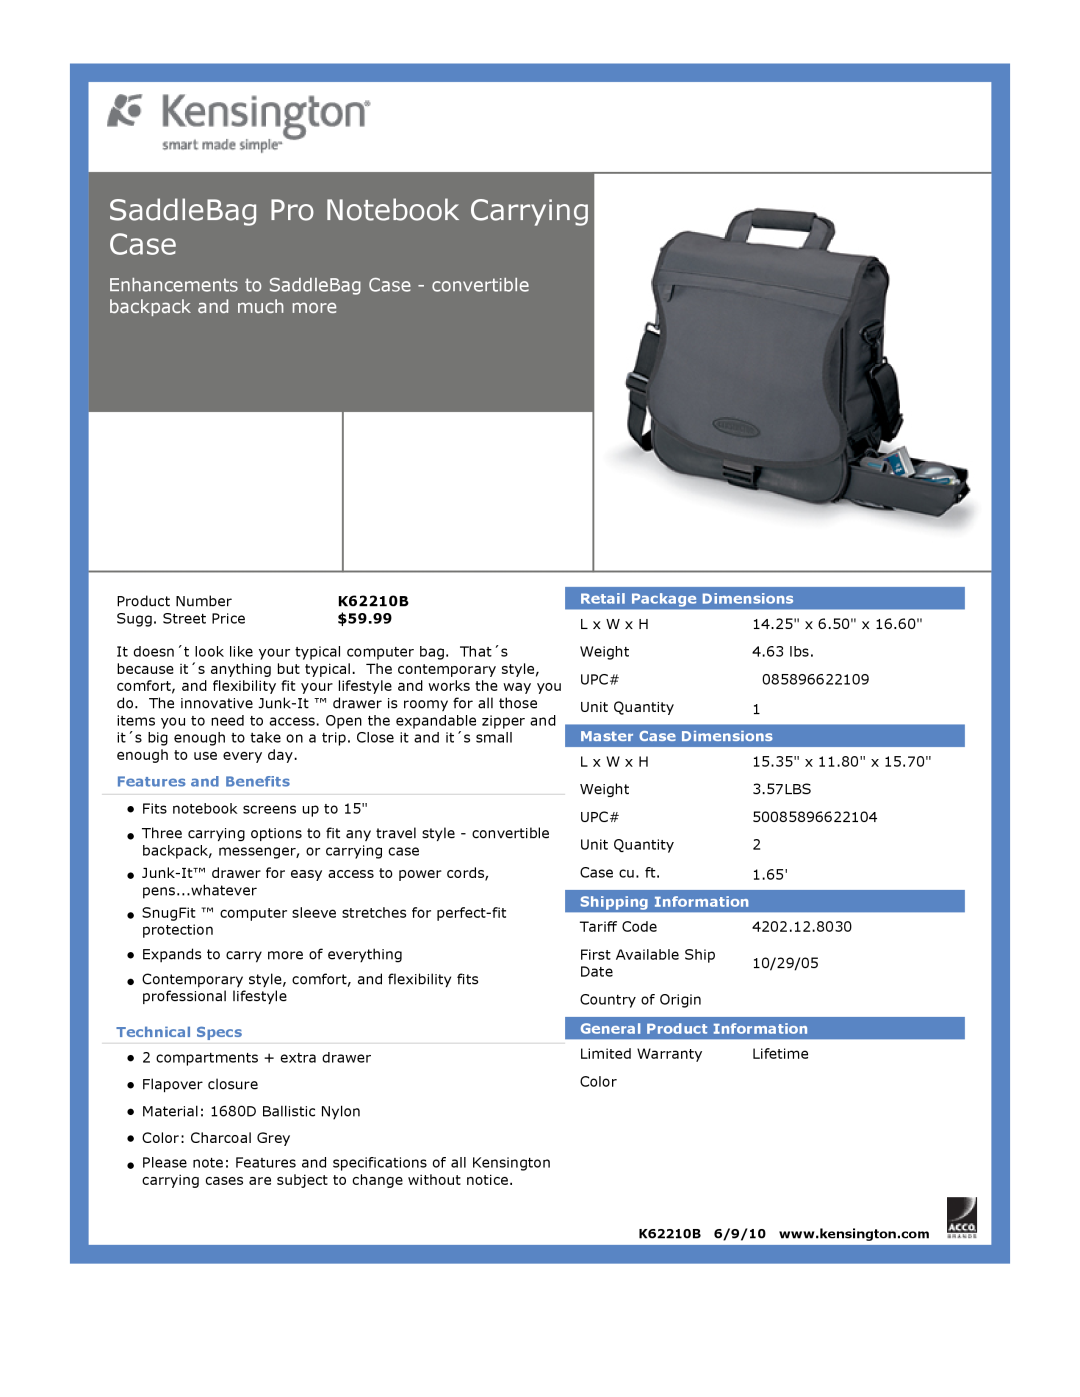 Kensington EU64325 dimensions SaddleBag Pro Notebook Carrying Case, $59.99, Features and Benefits, Technical Specs 